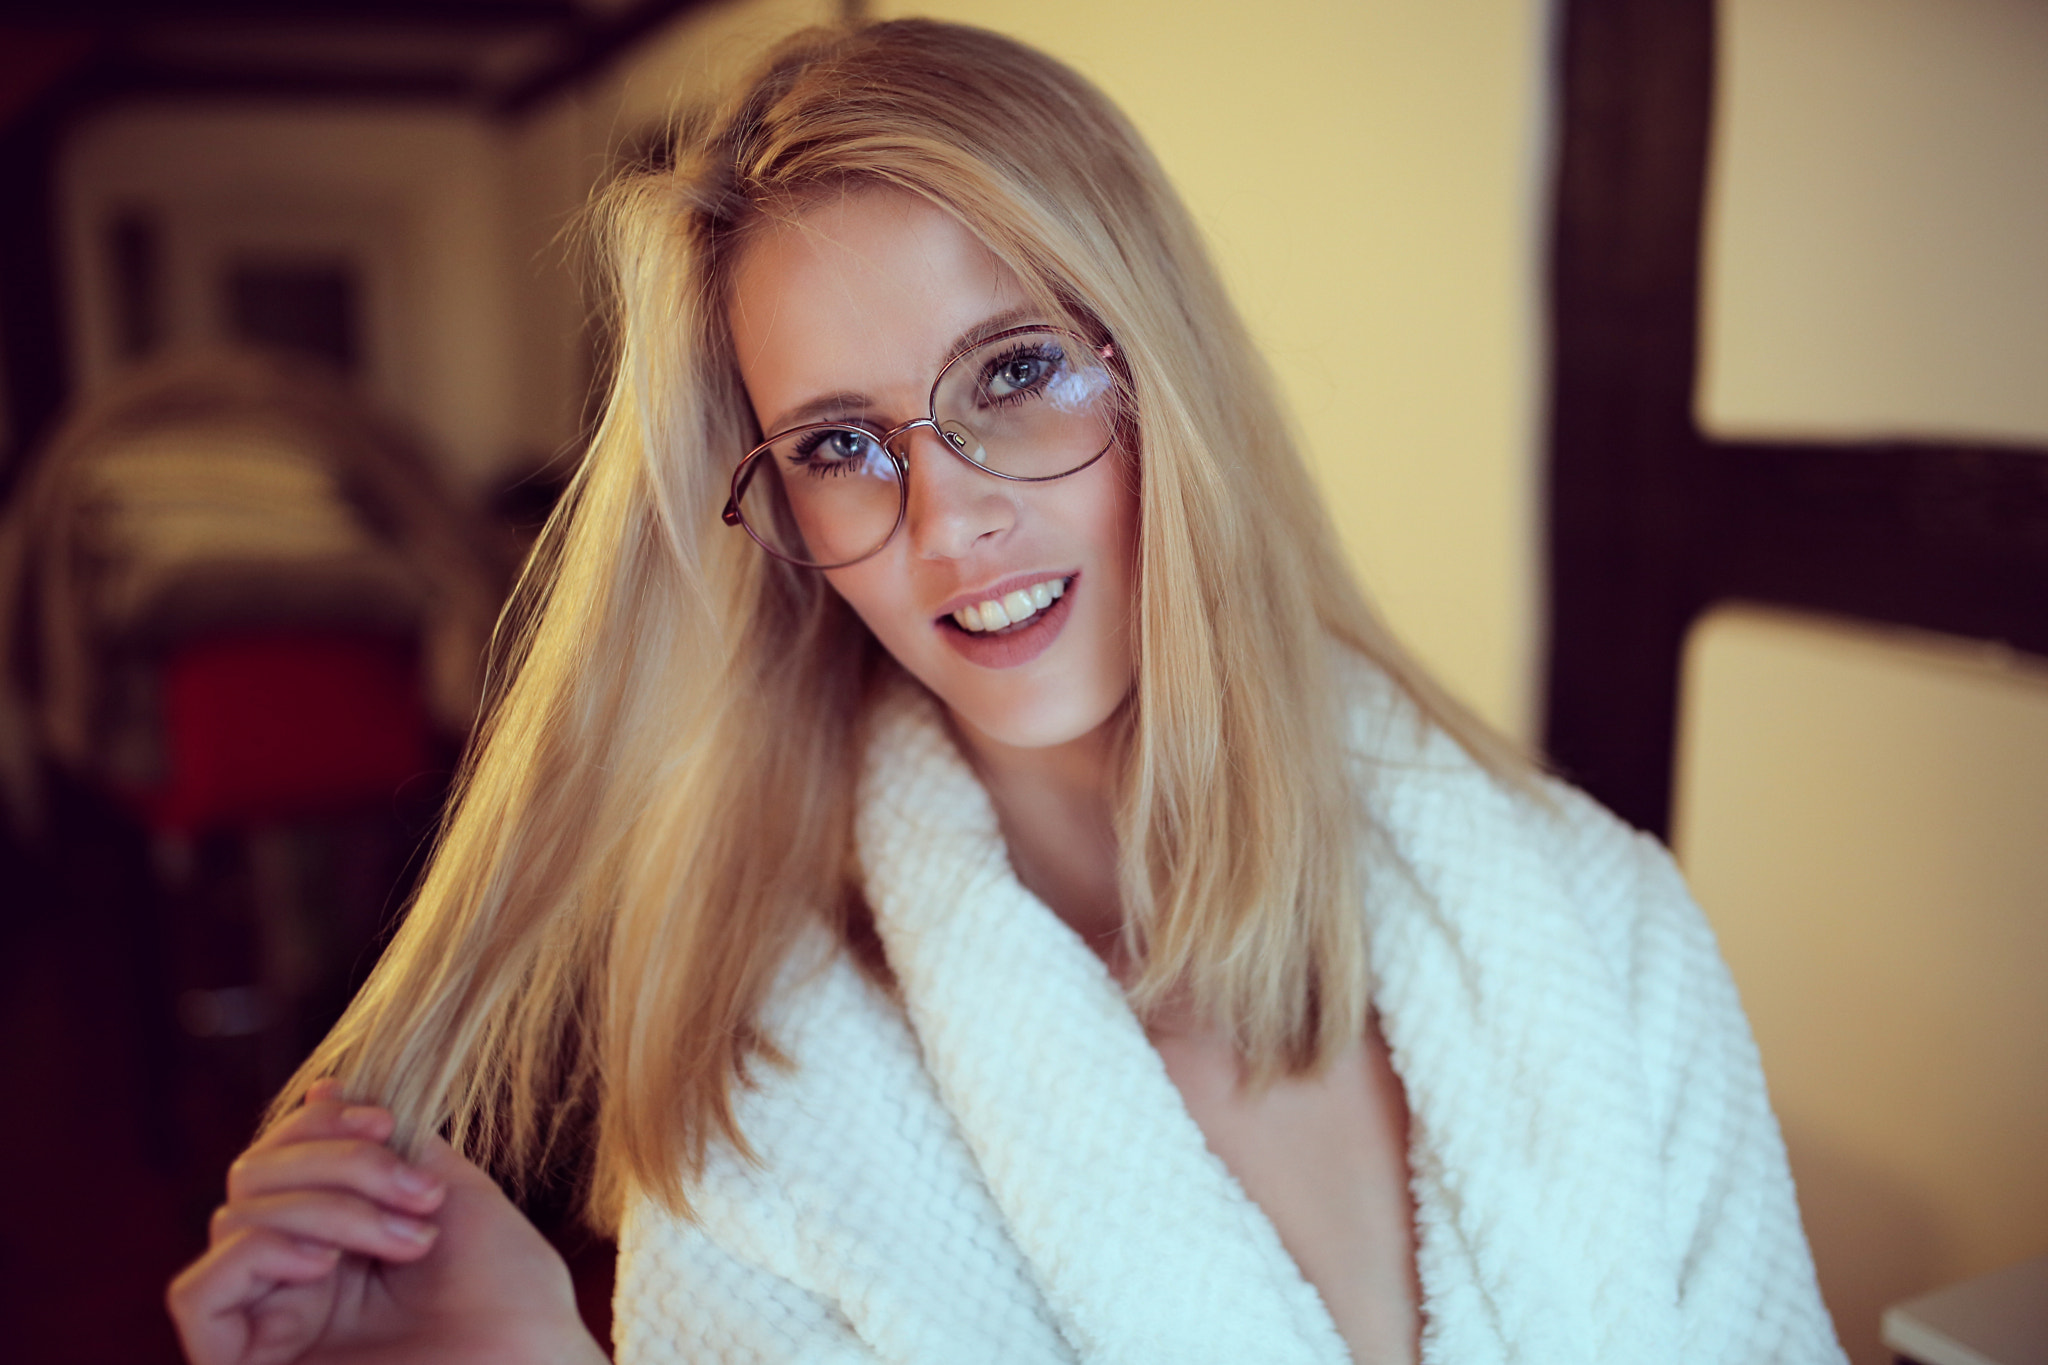 People 2048x1365 André Eversloh women model women with glasses long hair 500px